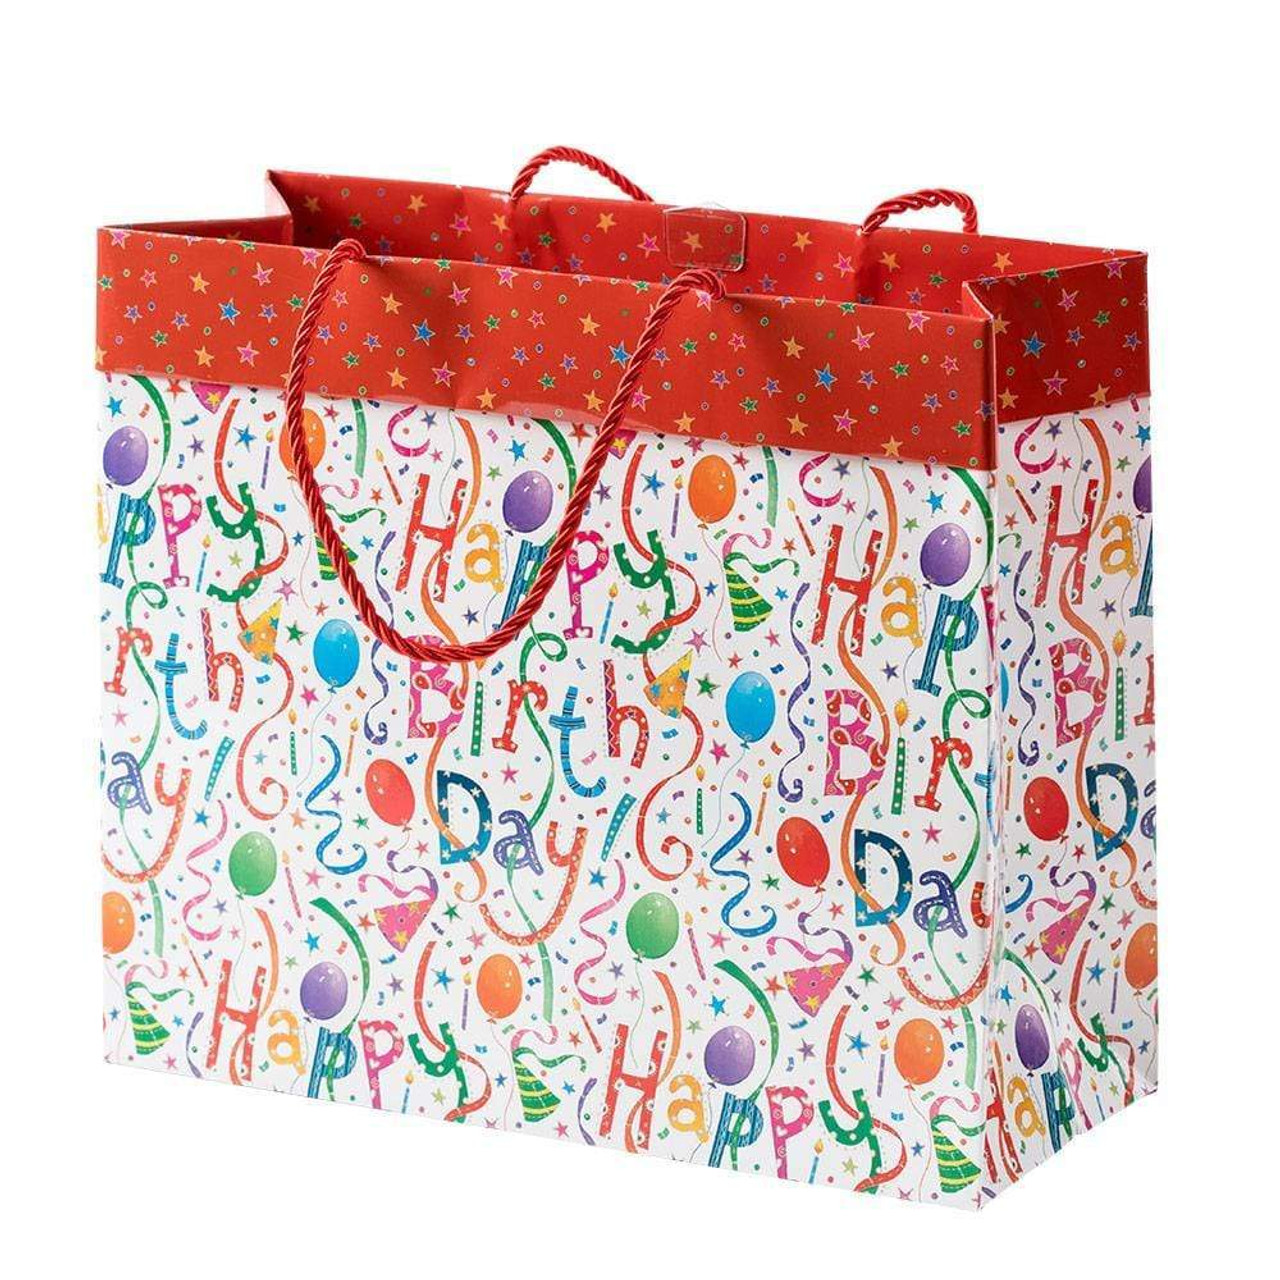 Caspari Balloons and Confetti Gift Wrapping Paper